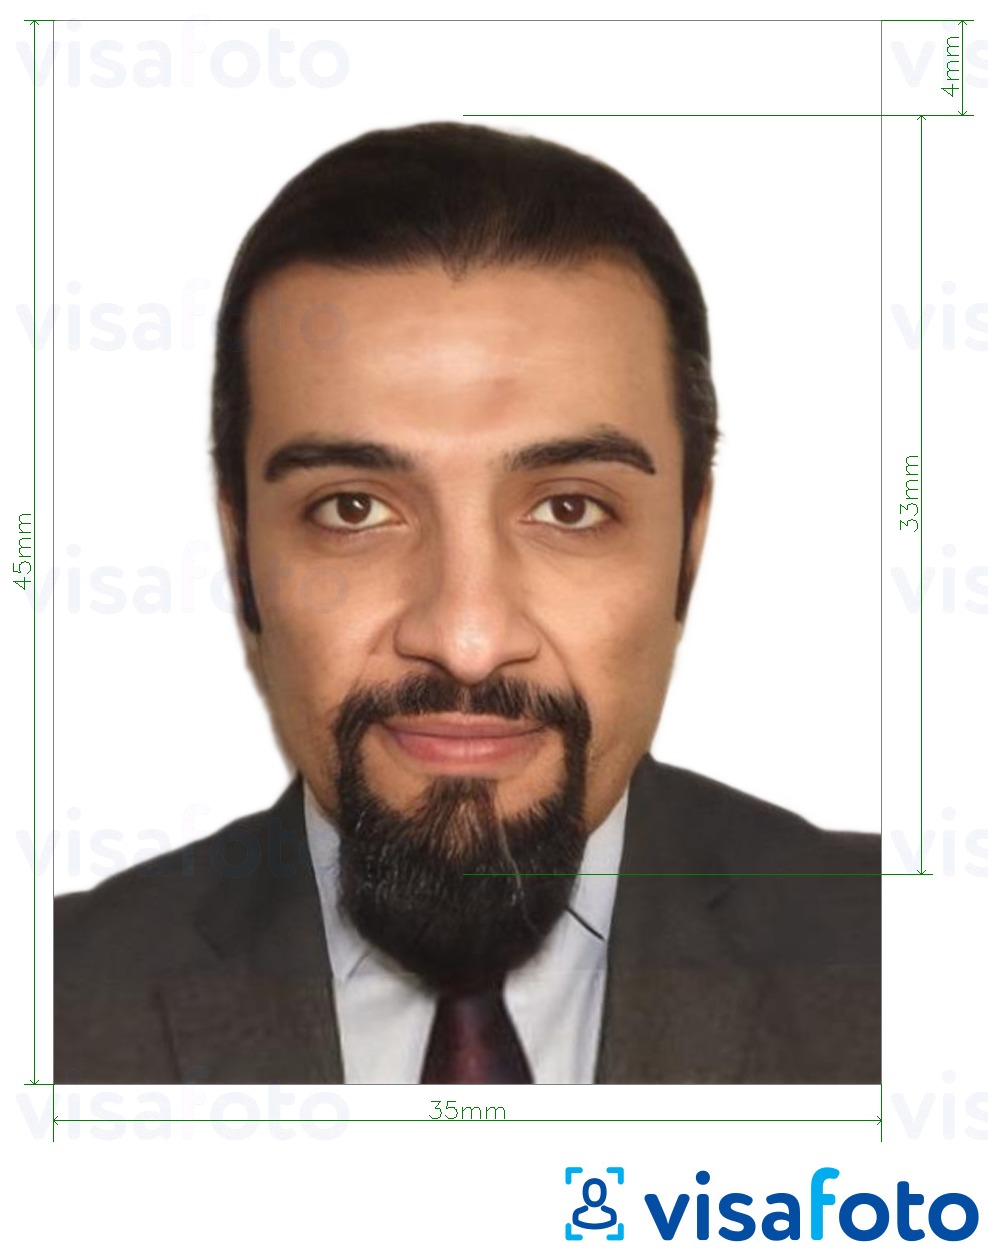 Example of photo for Tunisia ID card 3.5x4.5 cm (35x45 mm) with exact size specification